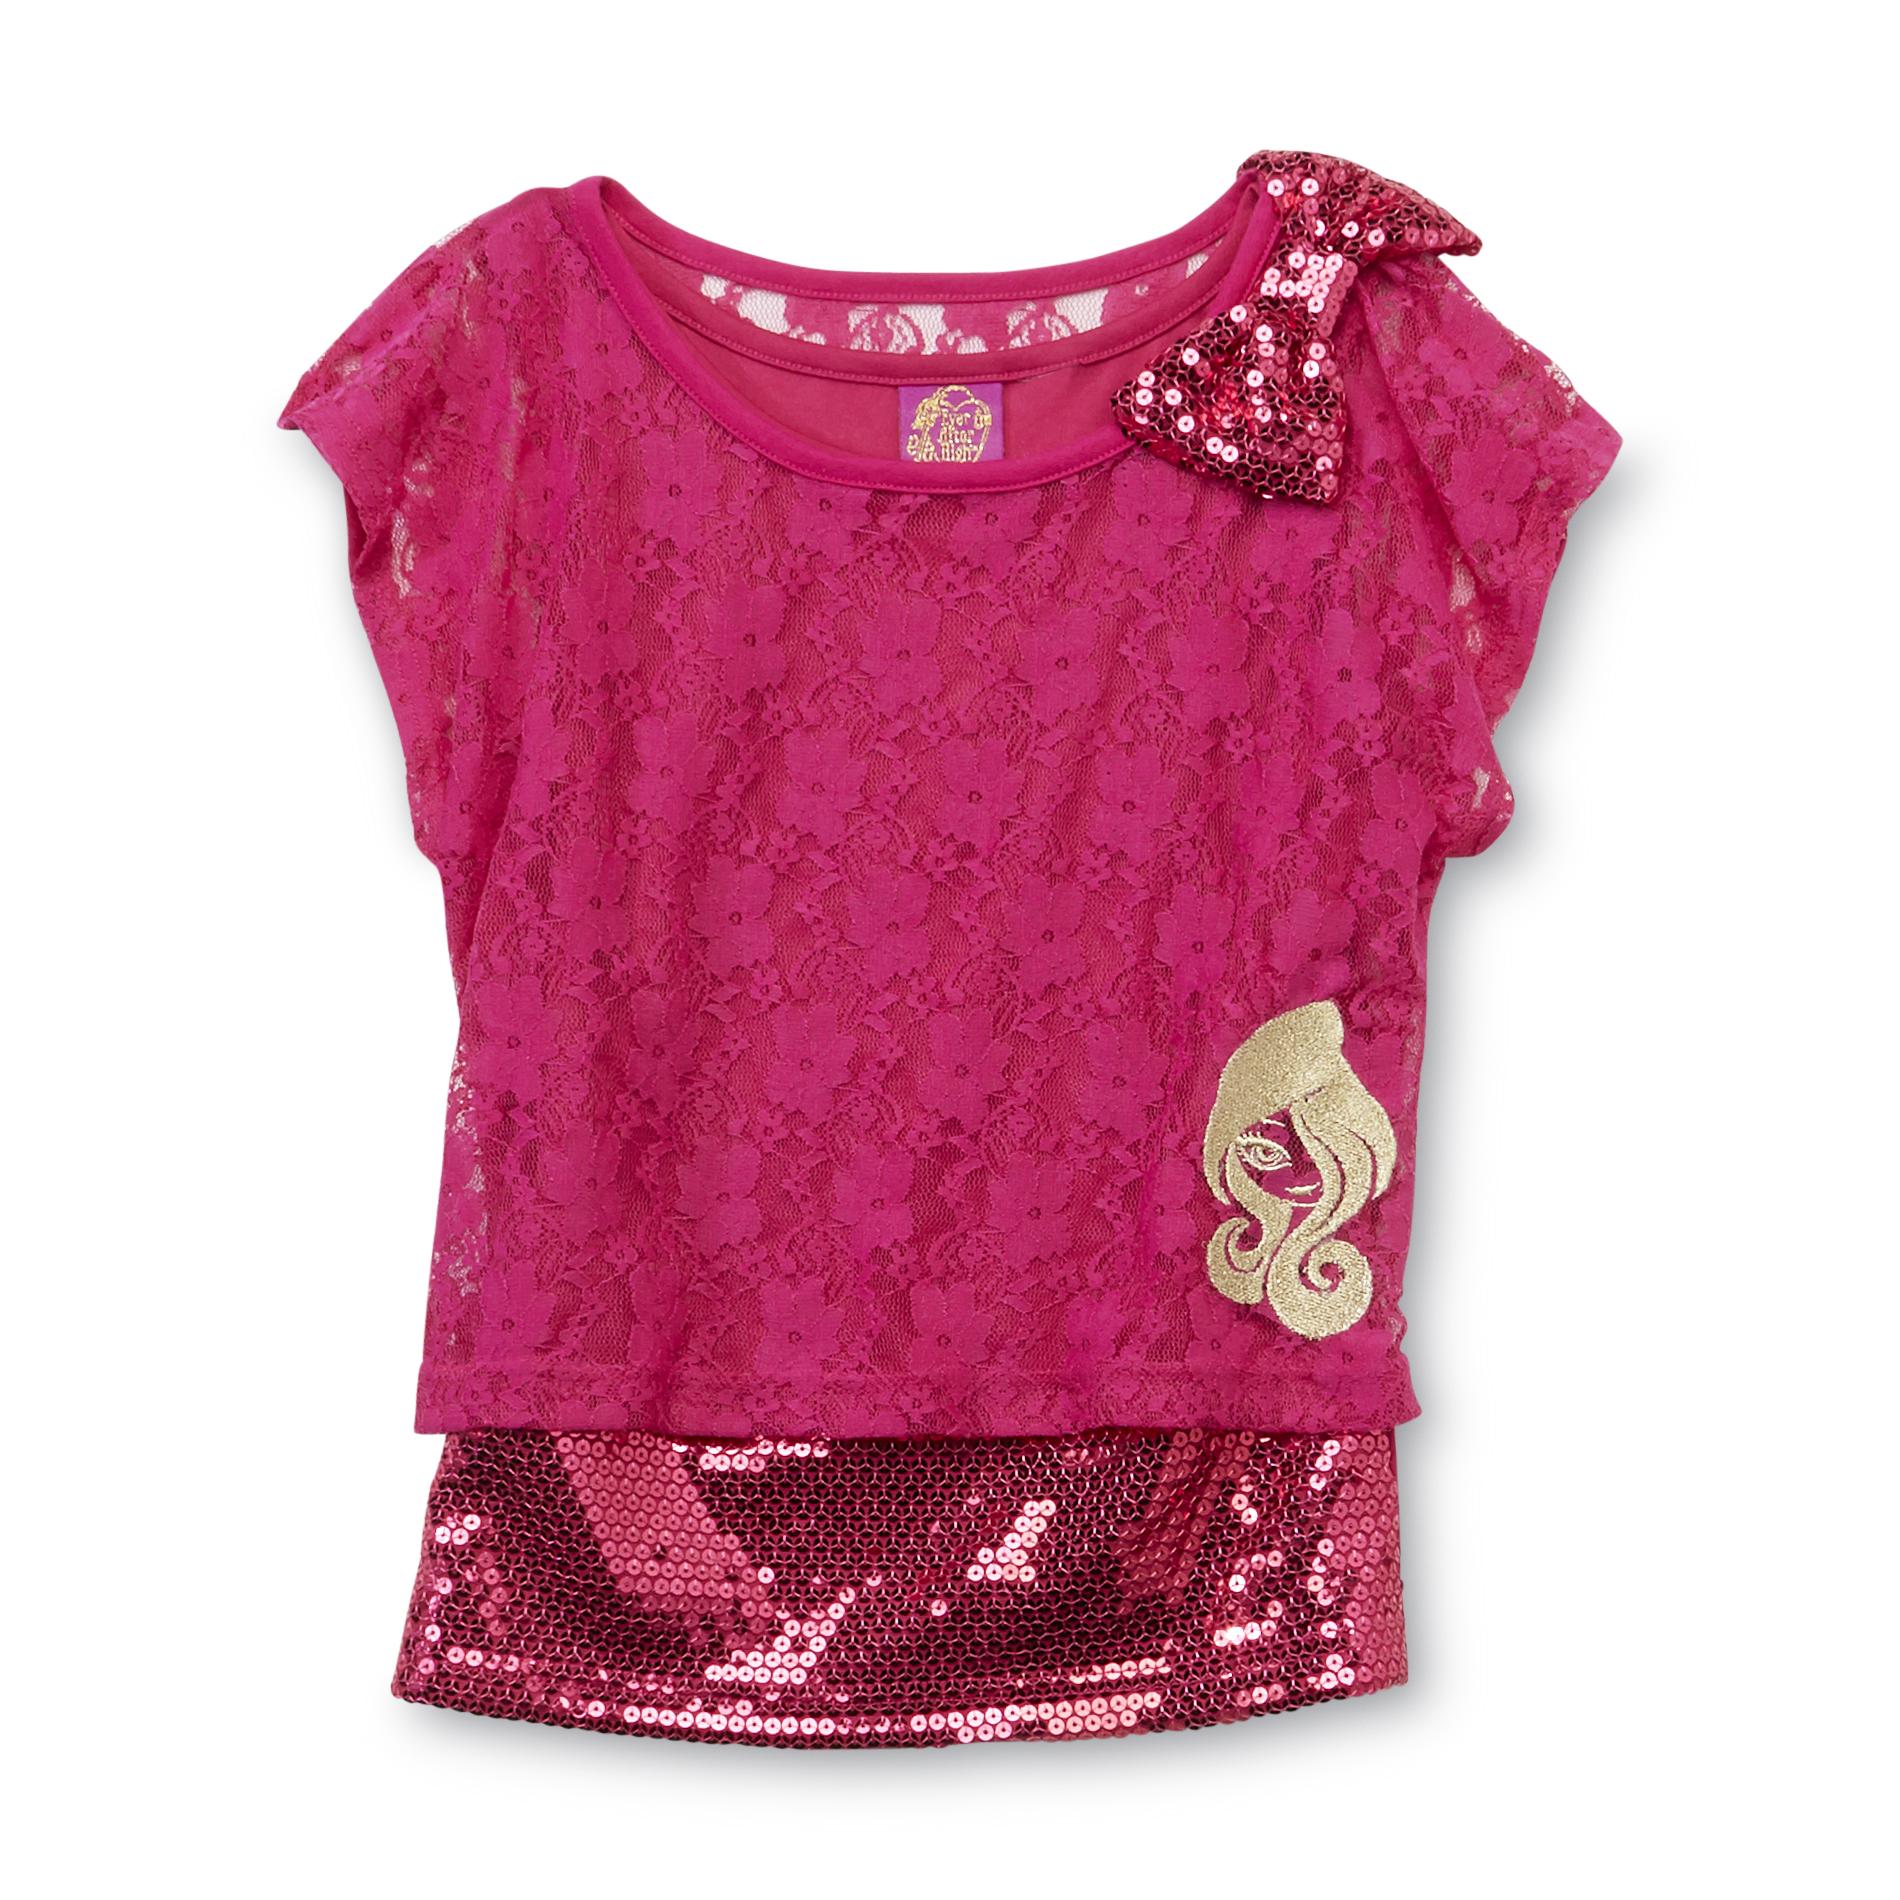 Ever After High Girl's Lace & Sequin Layered-Look Top